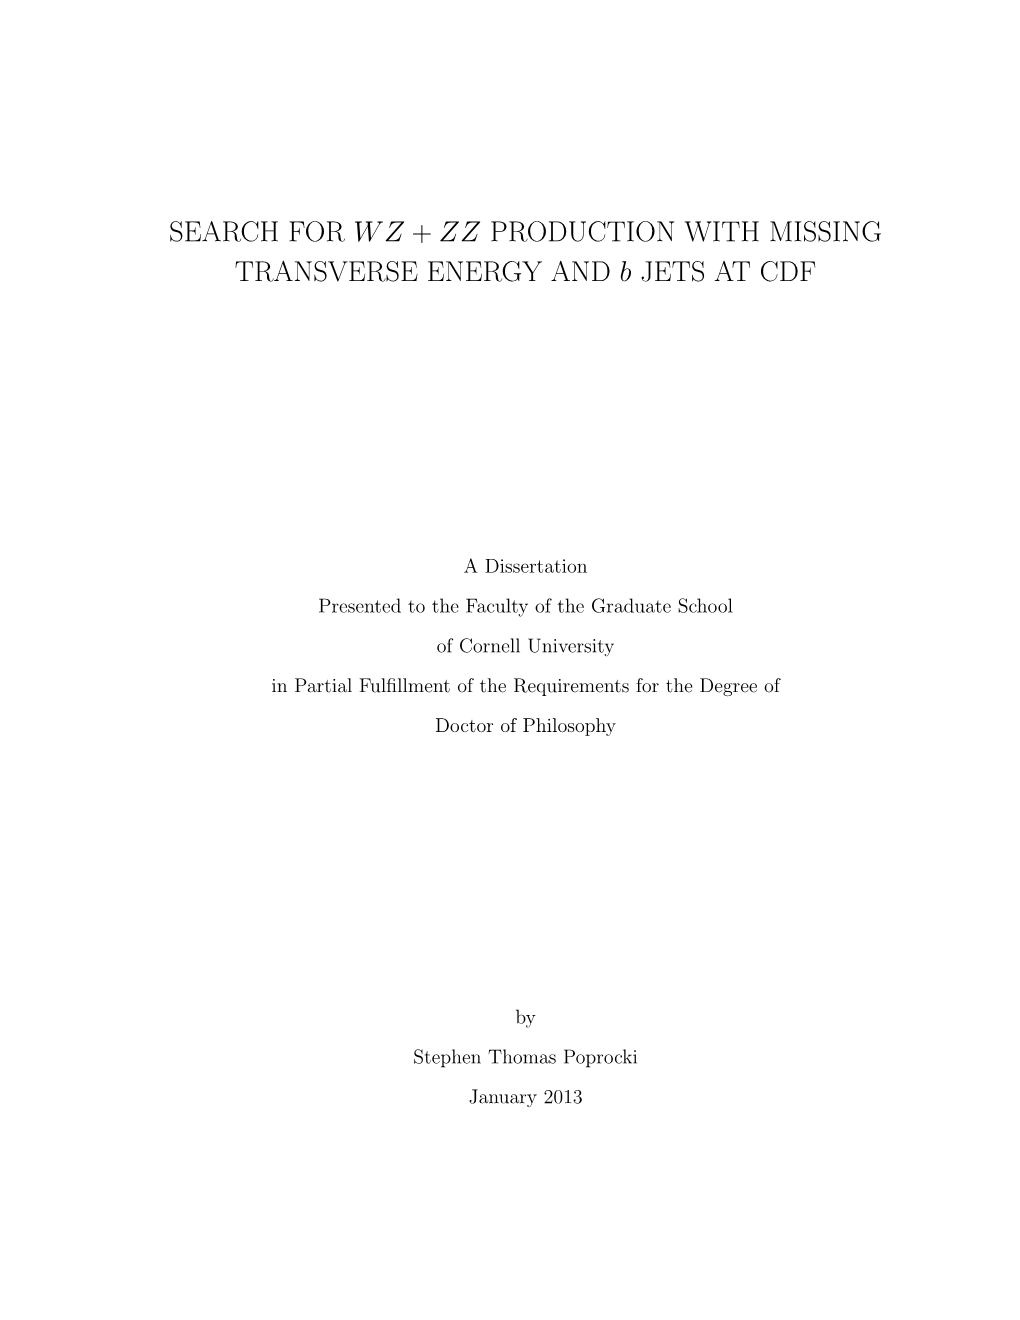 Search for WZ+ZZ Production with Missing Transverse Energy and B